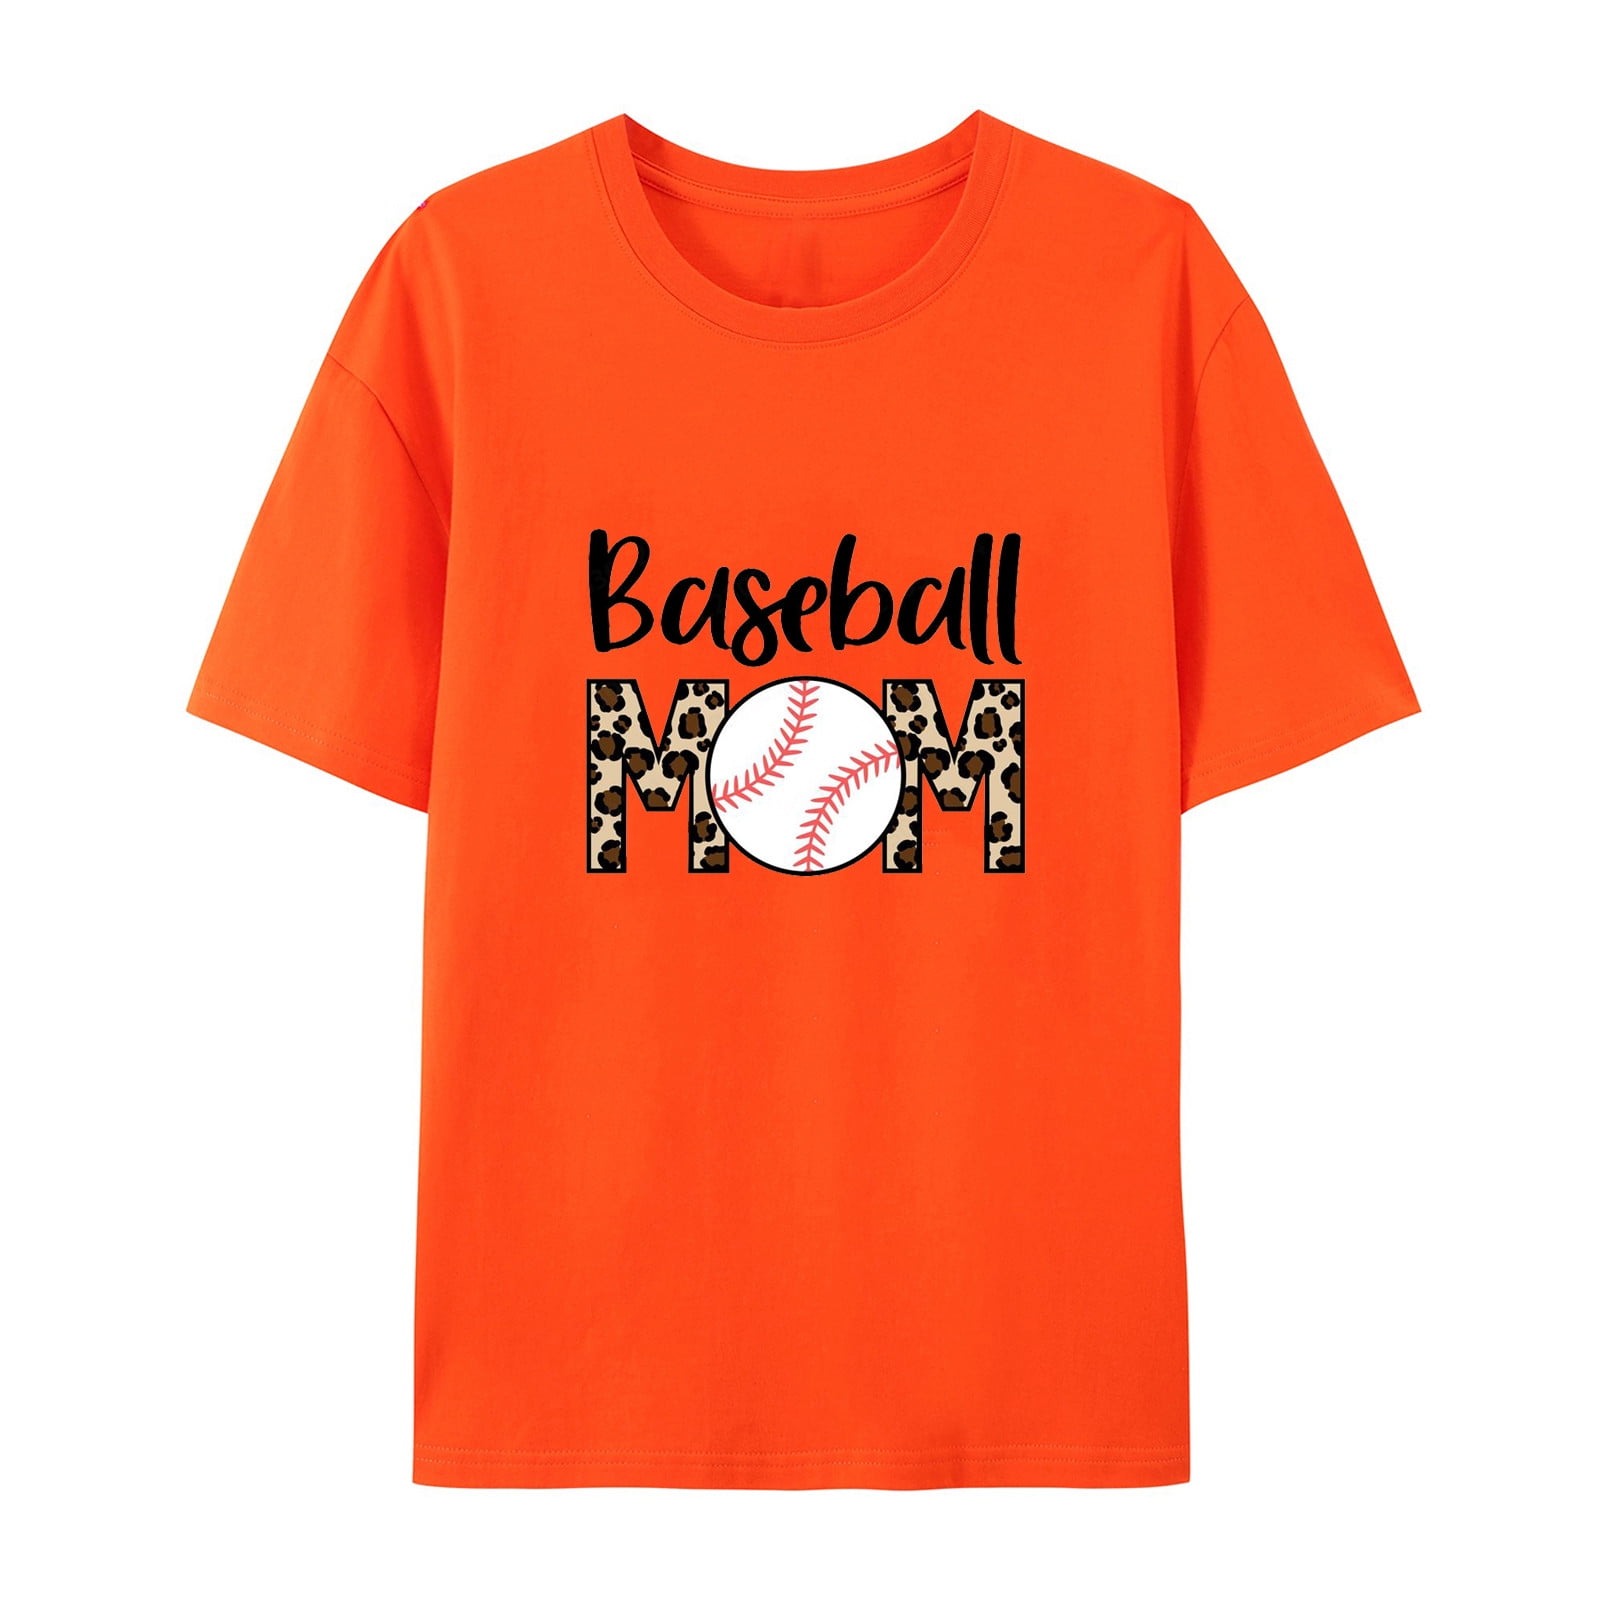 Aboser Mothers Day Shirts for Kids Girls Boys Baseball Workout Tops ...